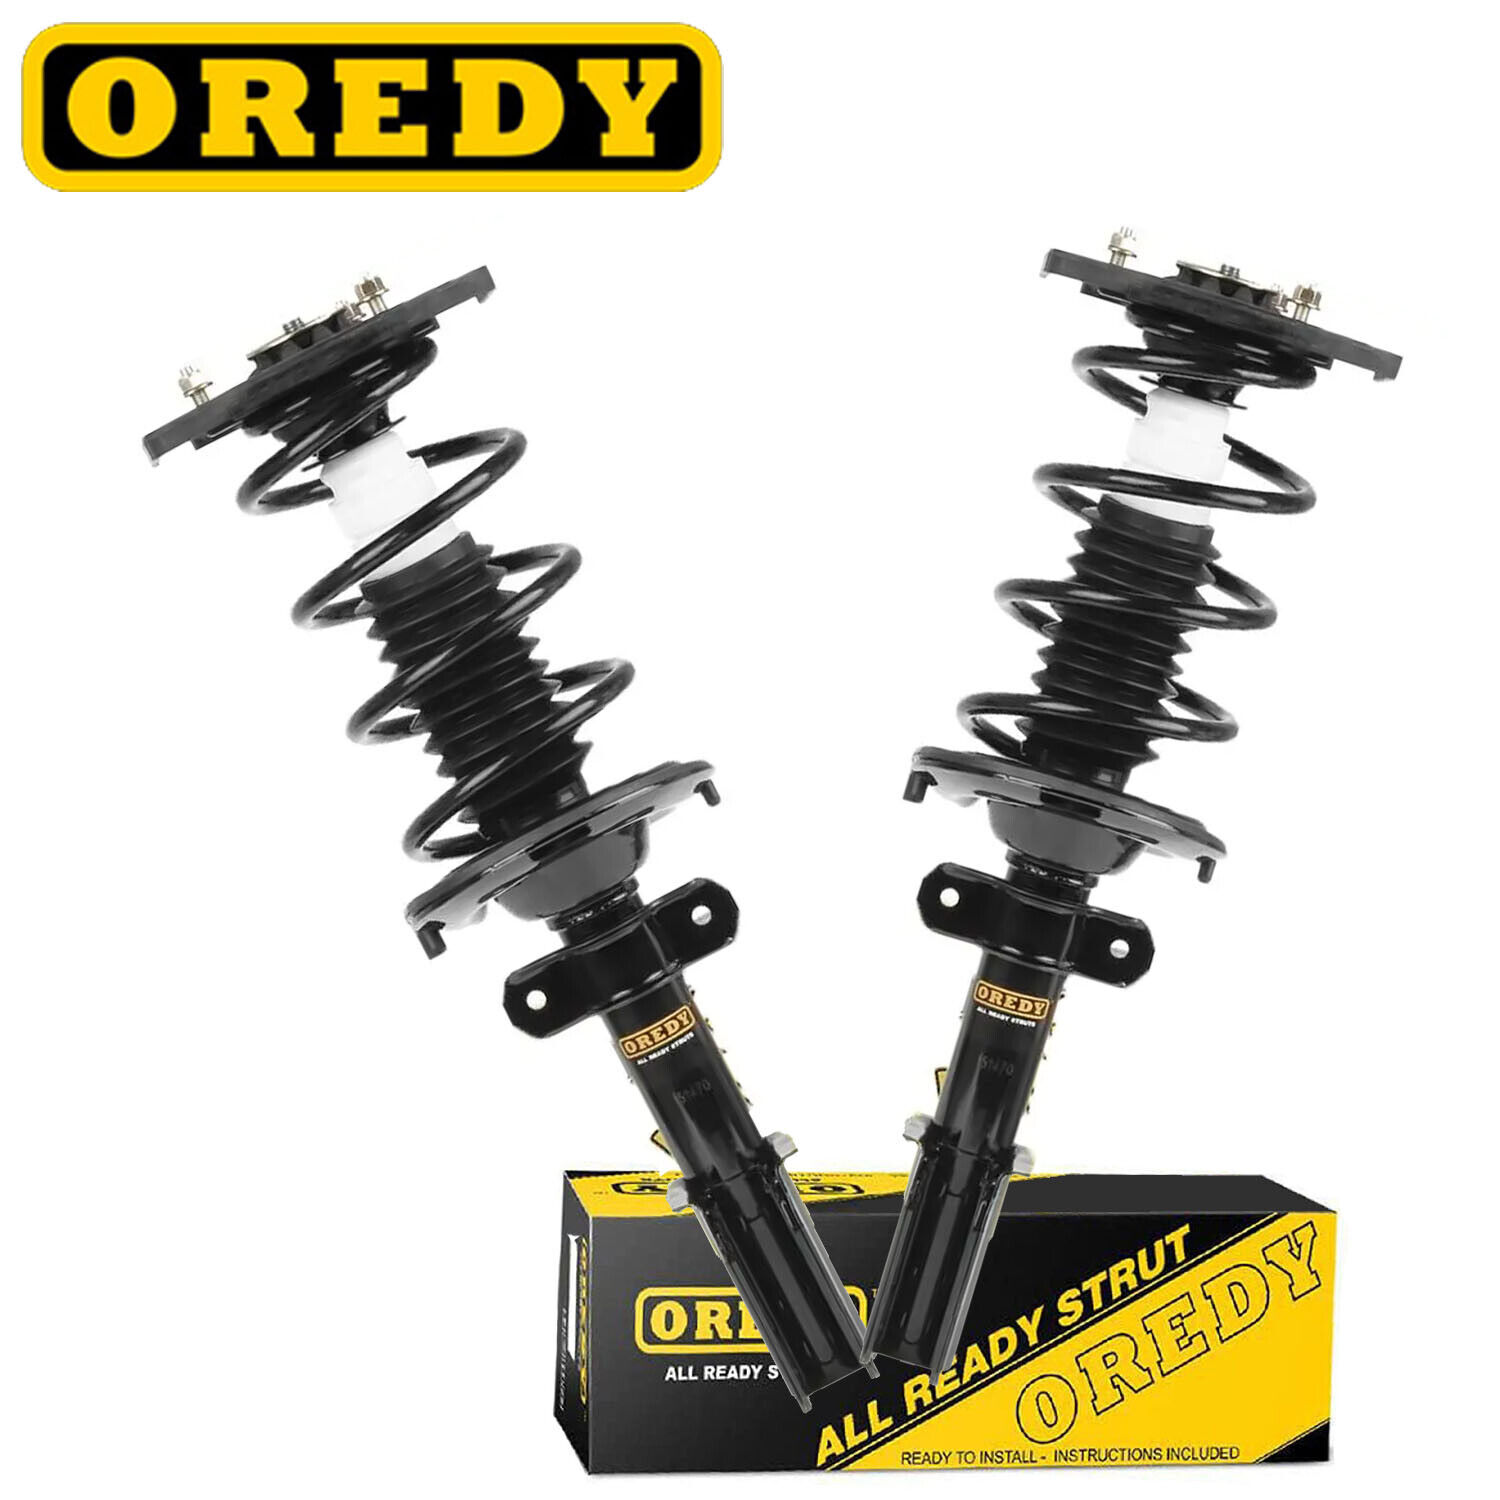 Pair Rear Struts for 2000-2011 Chevy Impala 1998-02 Olds Intrigue 16\'\' WheelBase